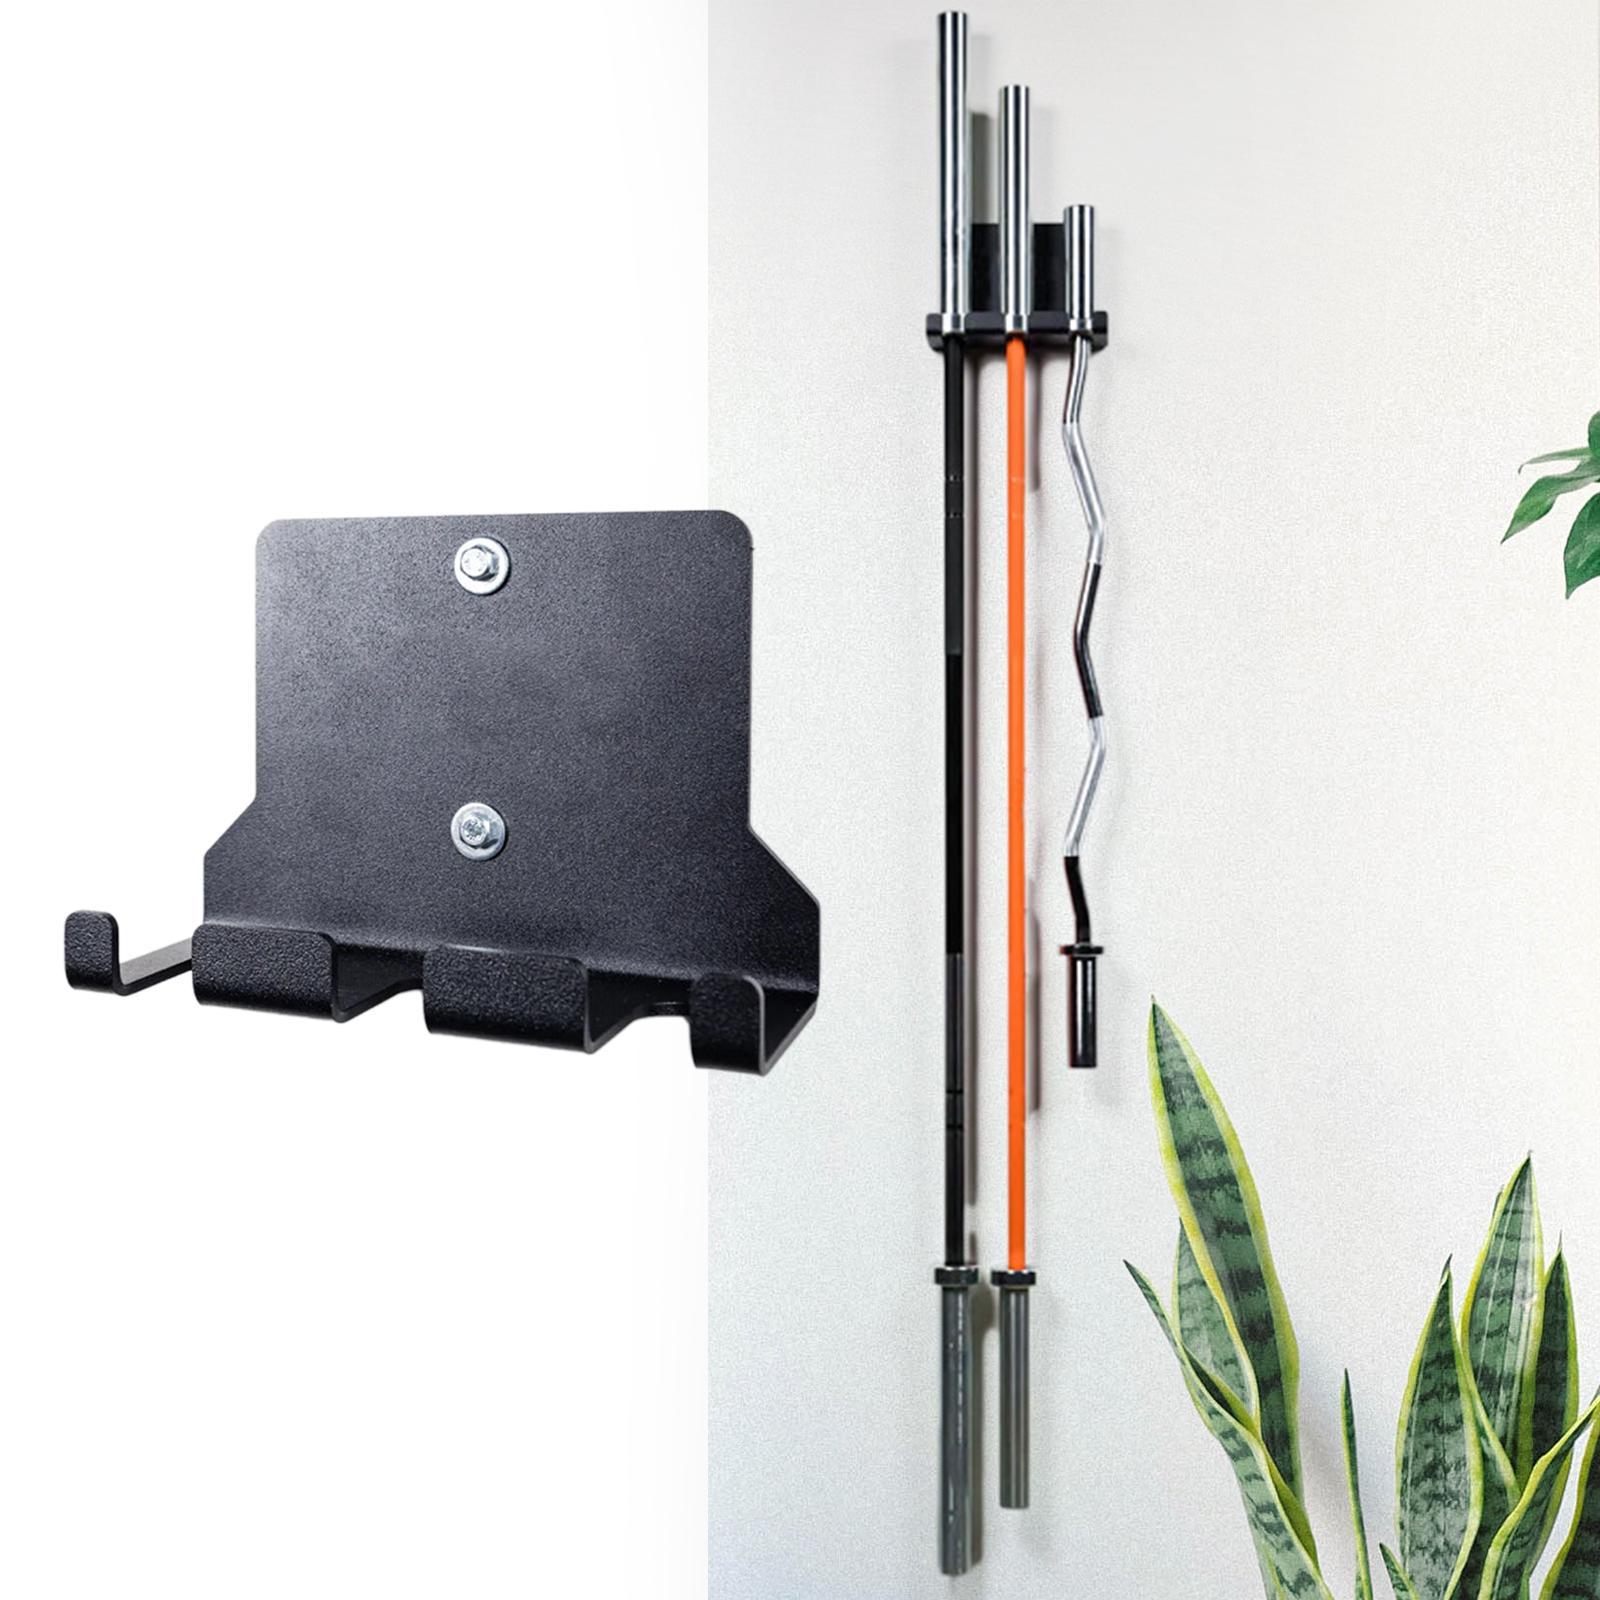 Barbell Holder Rack Vertical Hanging Weight Bar Mount with Screws Wall Hanger for Commercial Garage Workout Gym Equipment